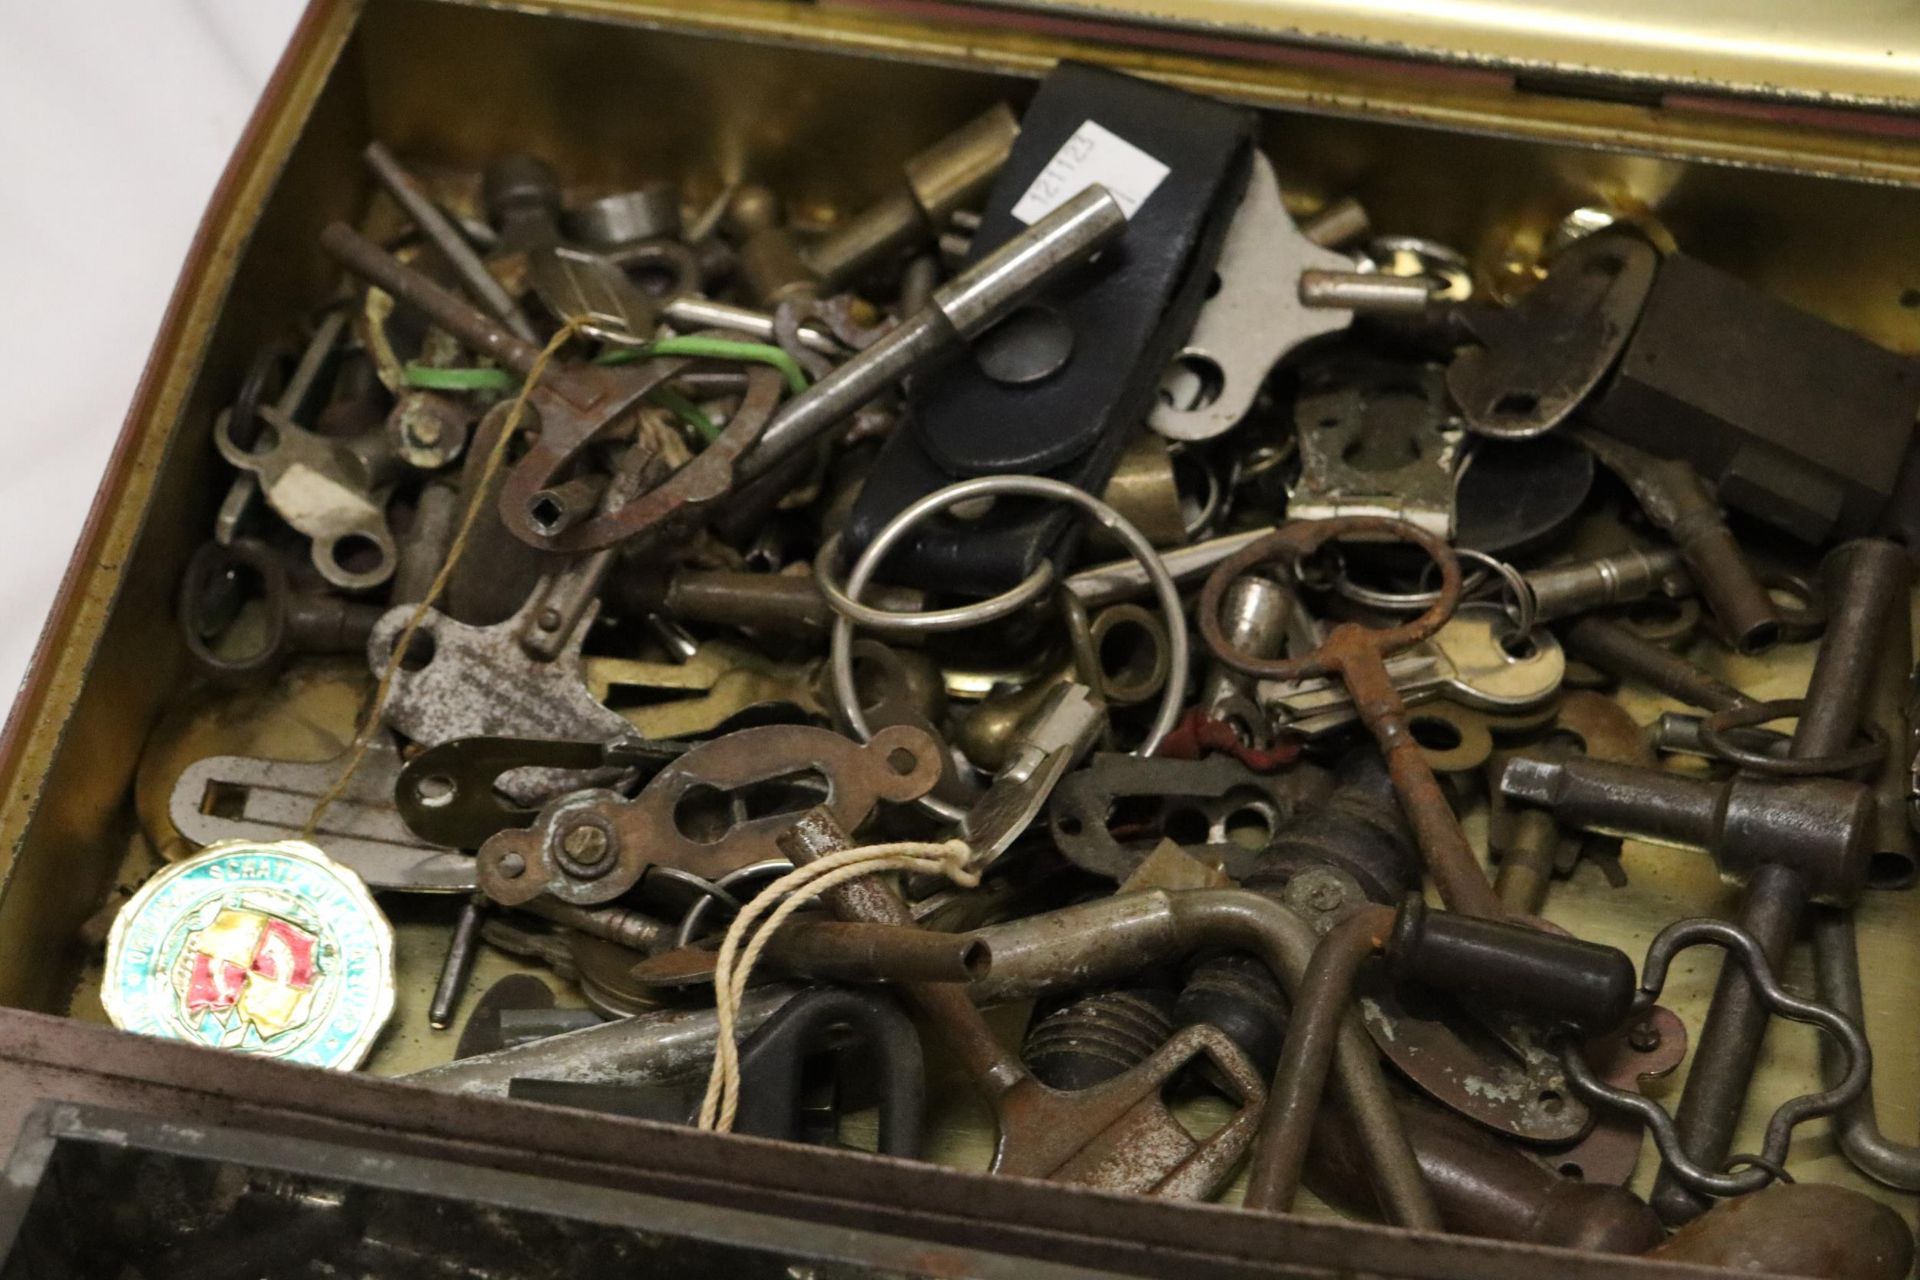 A LARGE QUANTITY OF VINTAGE FURNITURE AND CLOCK KEYS - Image 10 of 10